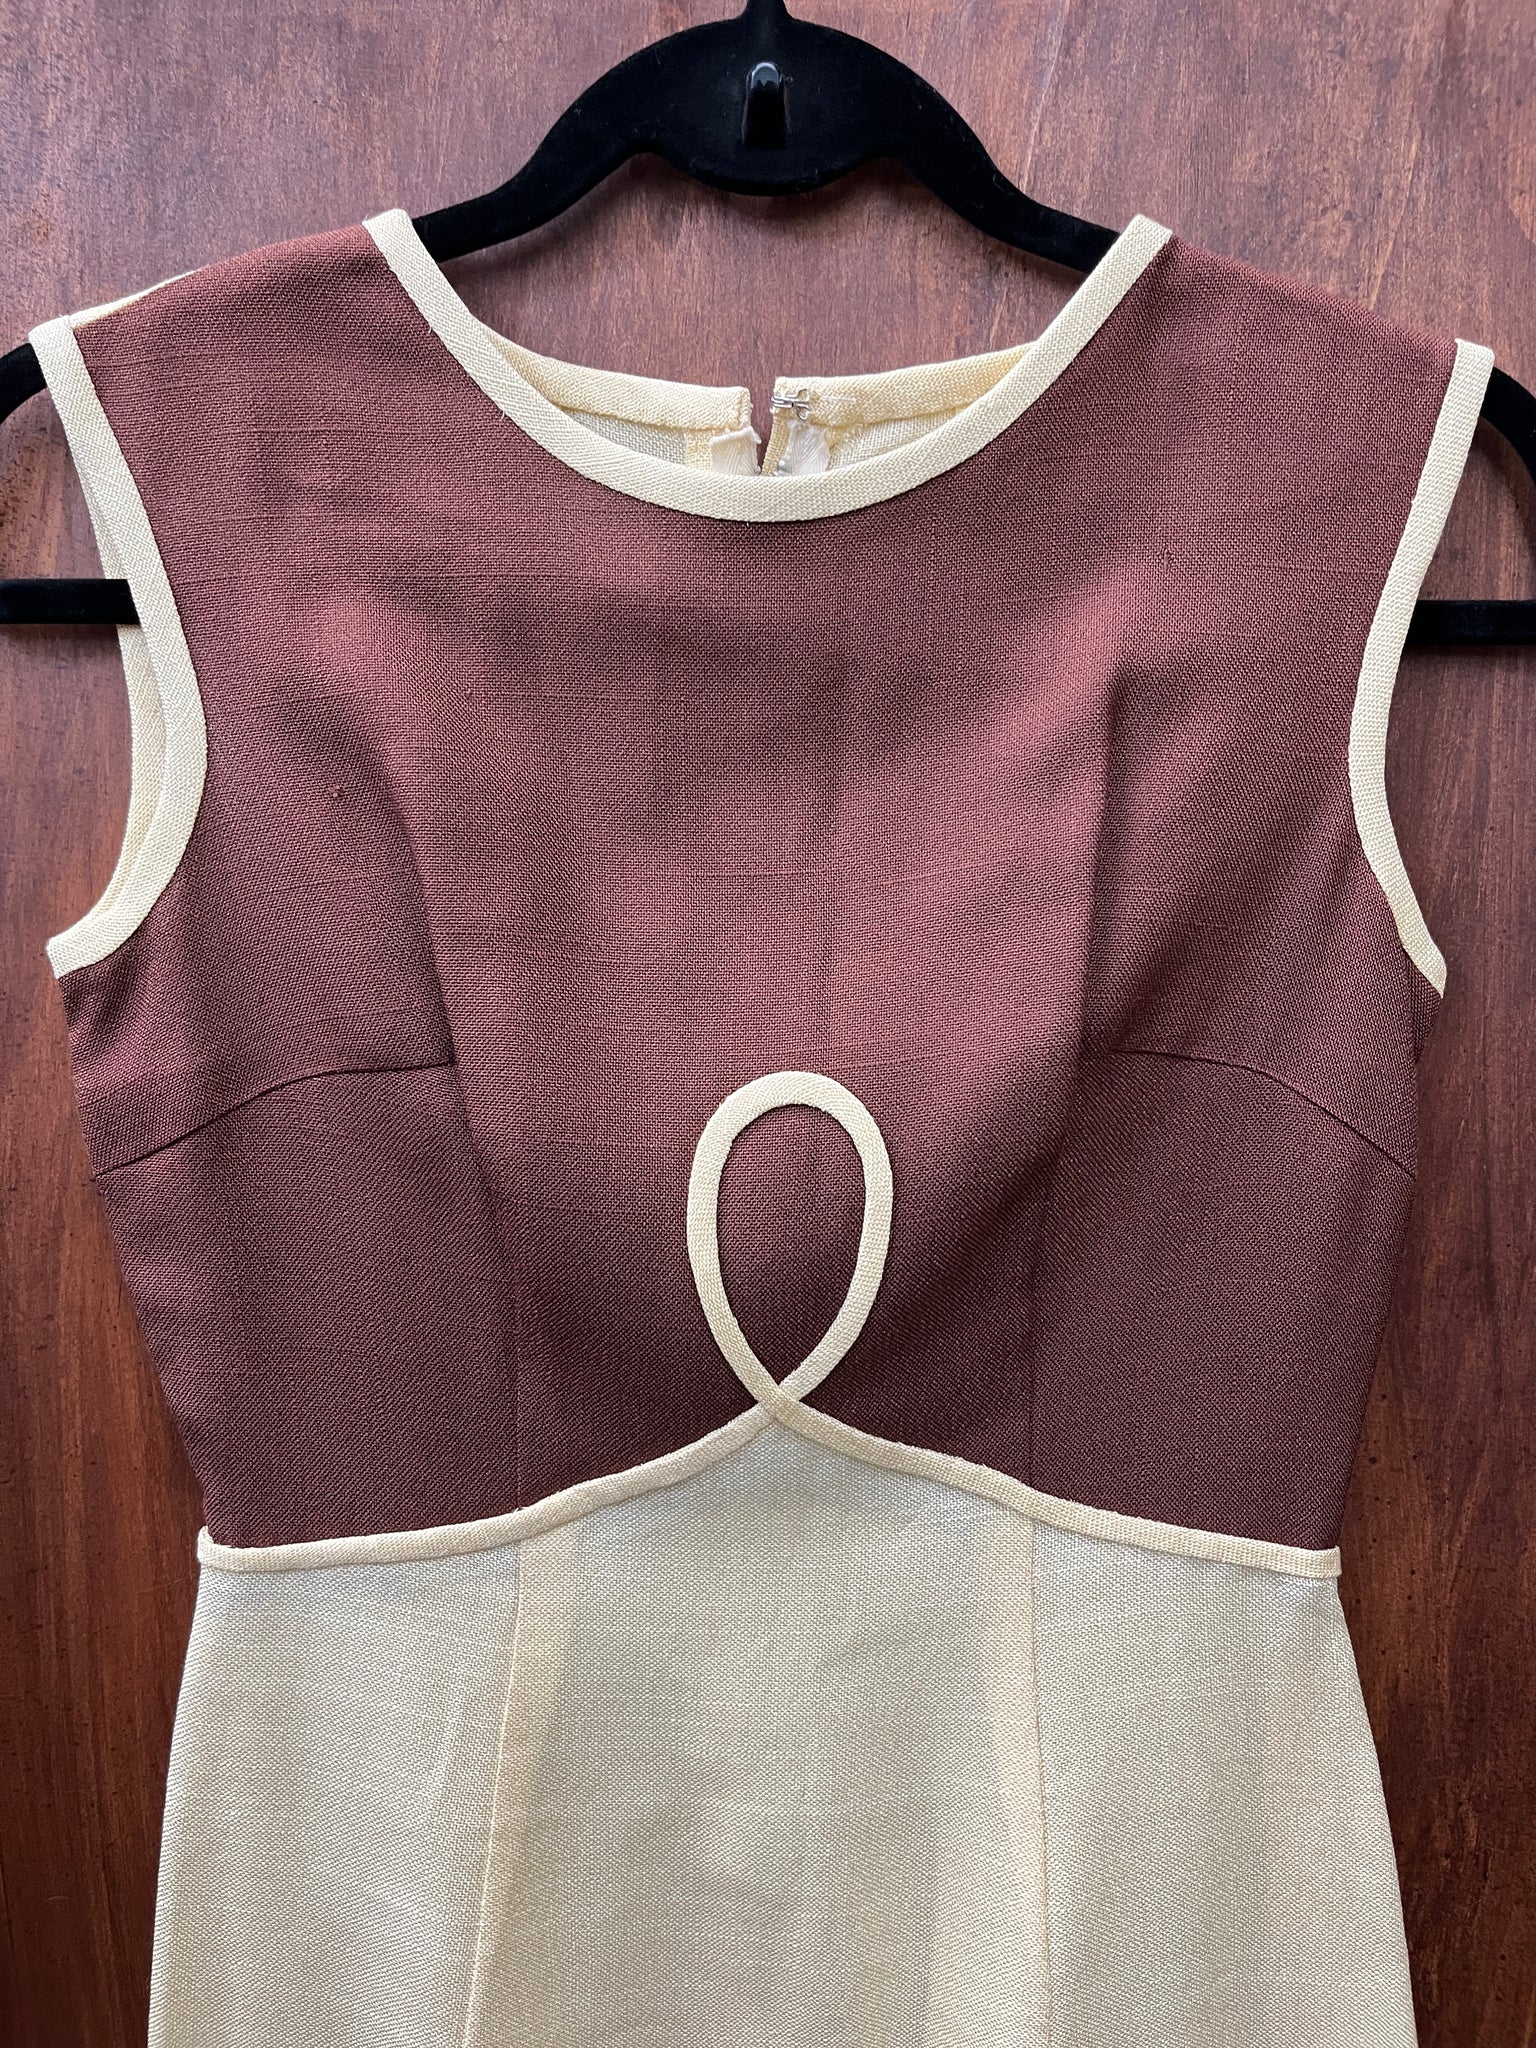 1960s DRESS- Brown/ cream mod mini embroidered detail